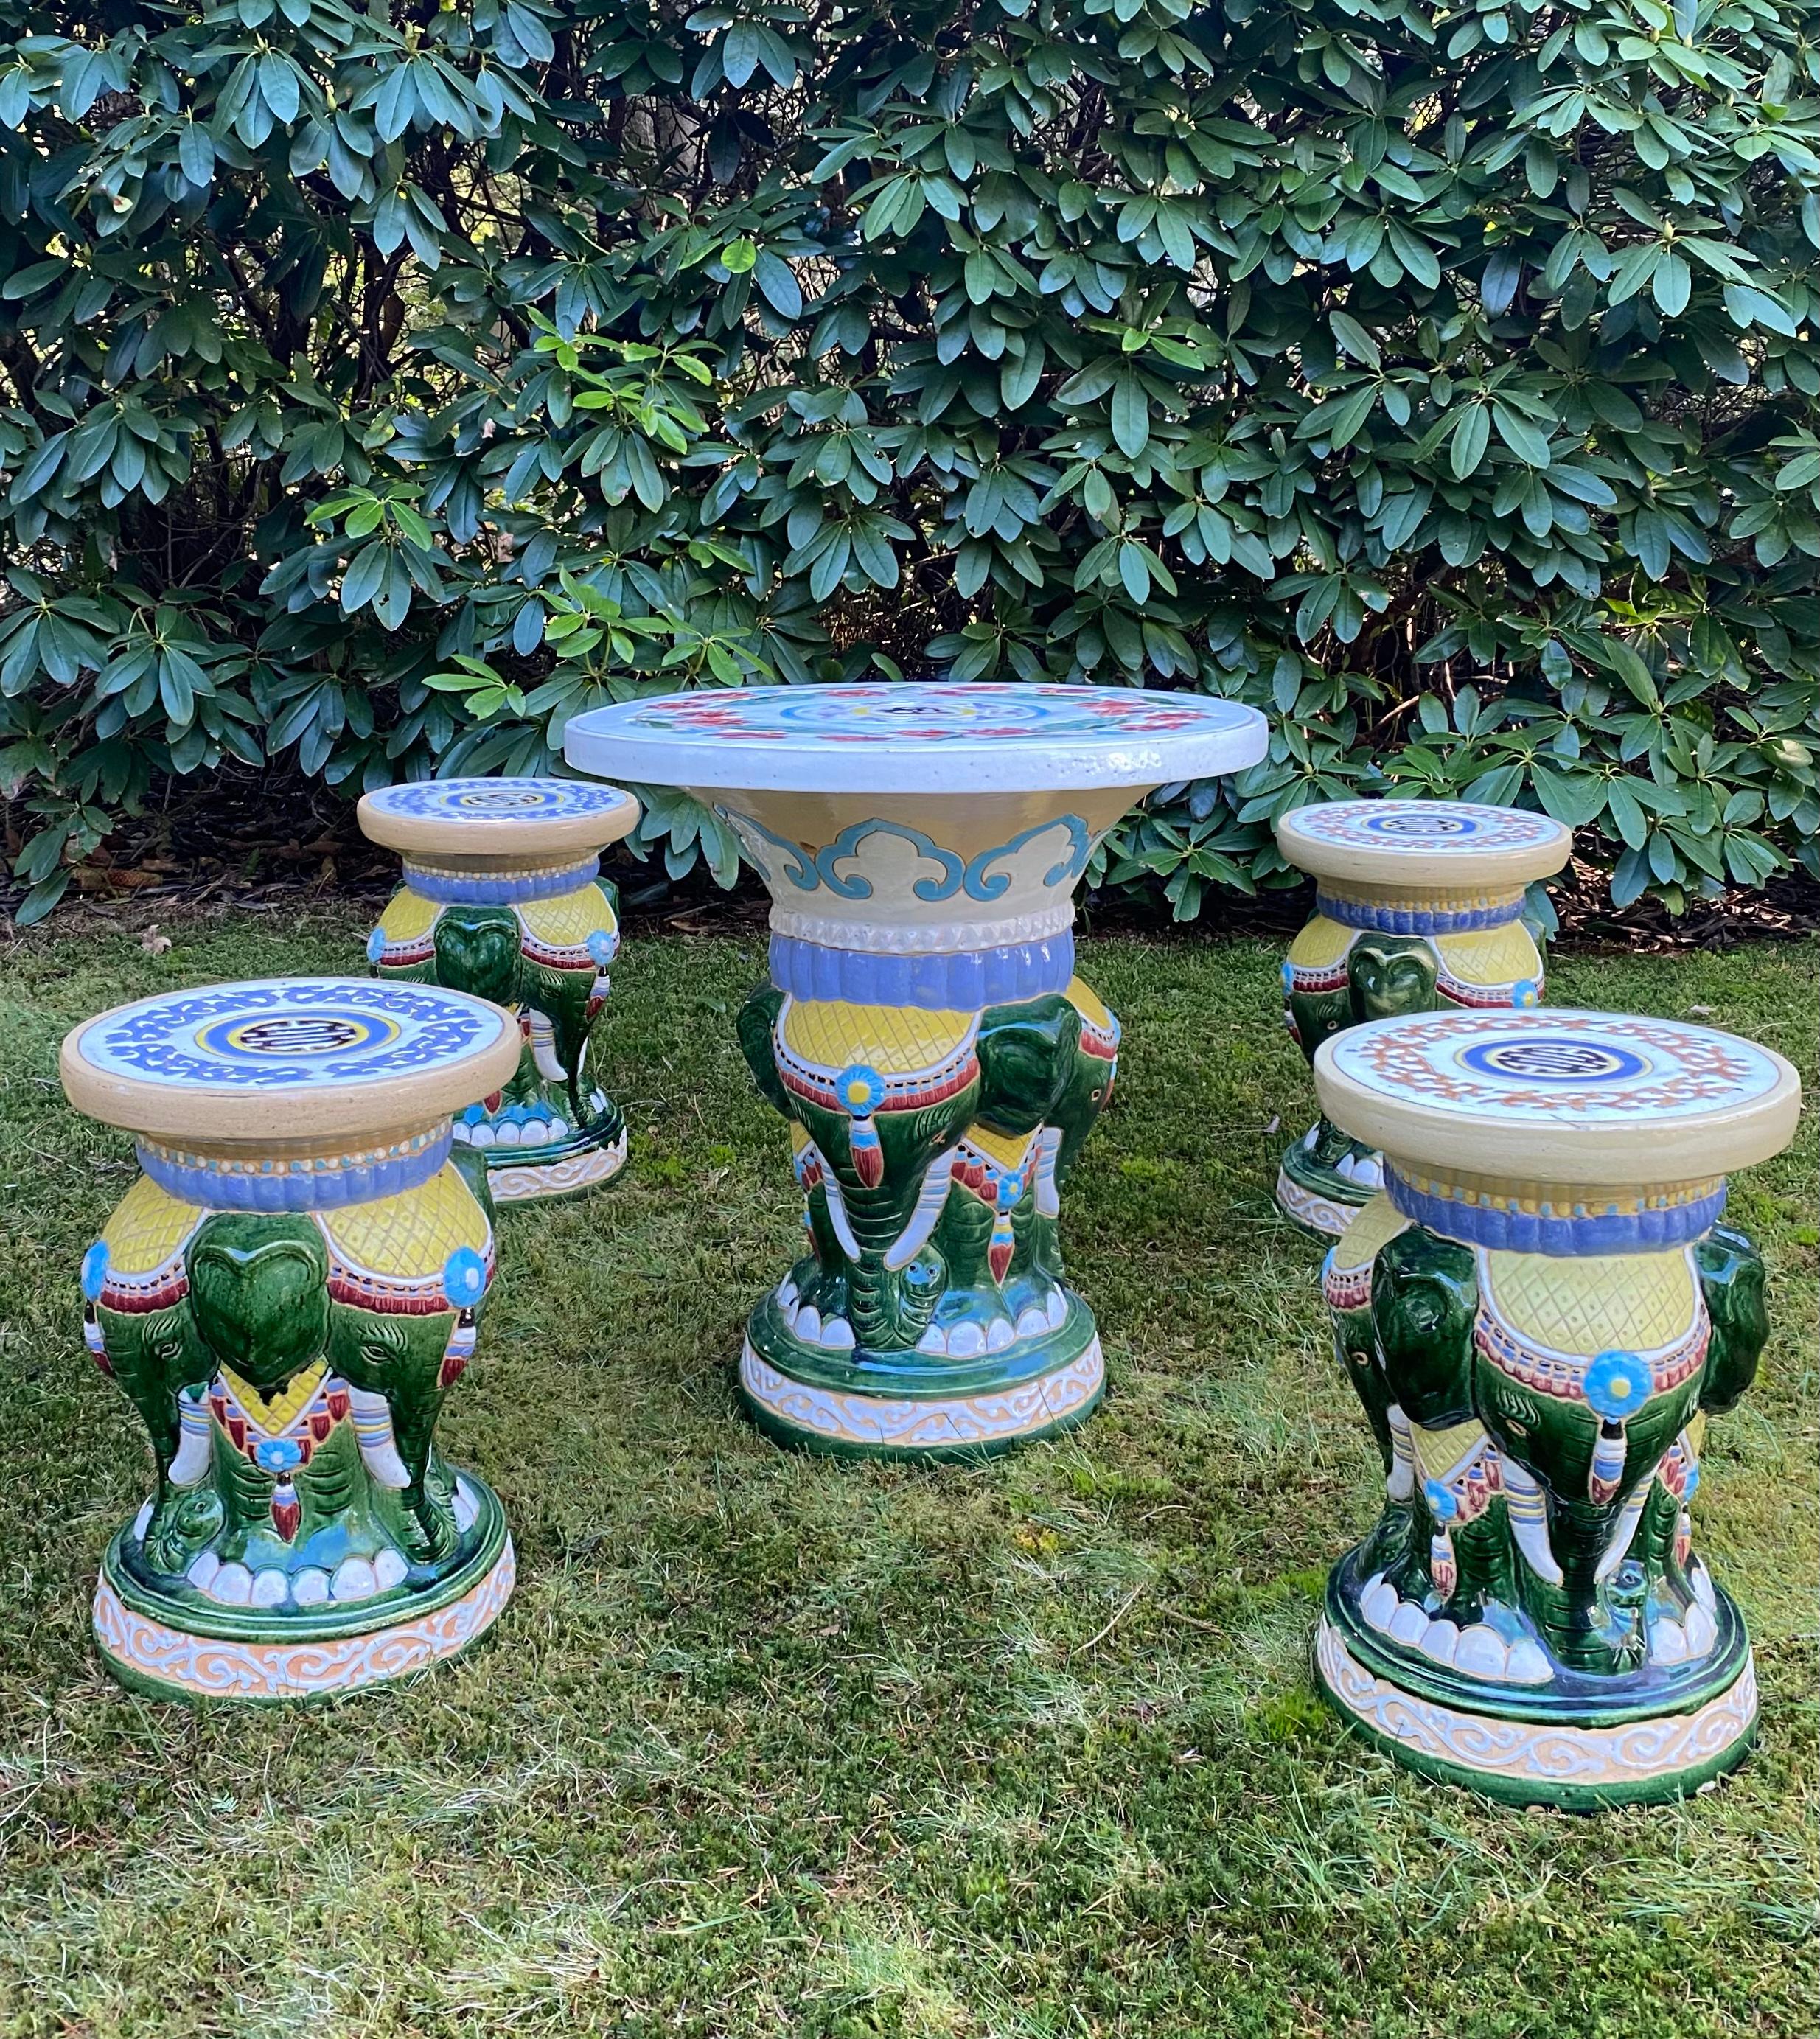 This Asian garden/patio elephant set was manufactured, circa 1960s-1970s and features a Classic design with beautiful Pastel colors. On top of the stools, there is, what seems to be, a prosperity symbol. Very nice addition to any garden, patio or